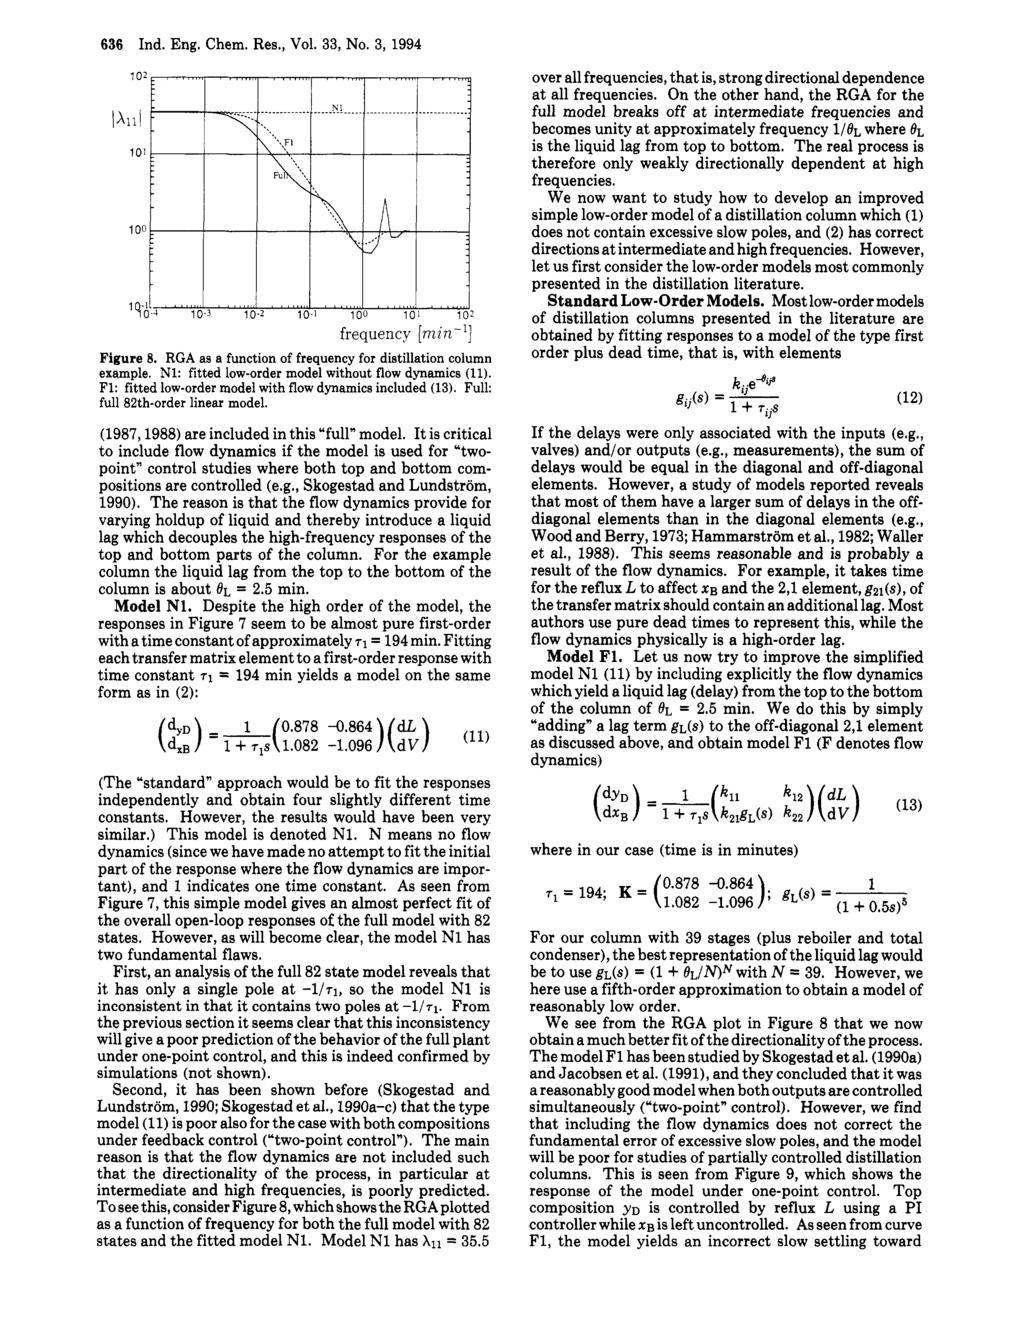 636 Ind. Eng. Chem. Res., Vol. 33, No. 3, 1994 frequency [rnin- 1 Figure 8. RGA as a function of frequency for distillation column example. N1: fitted low-order model without flow dynamics (11).